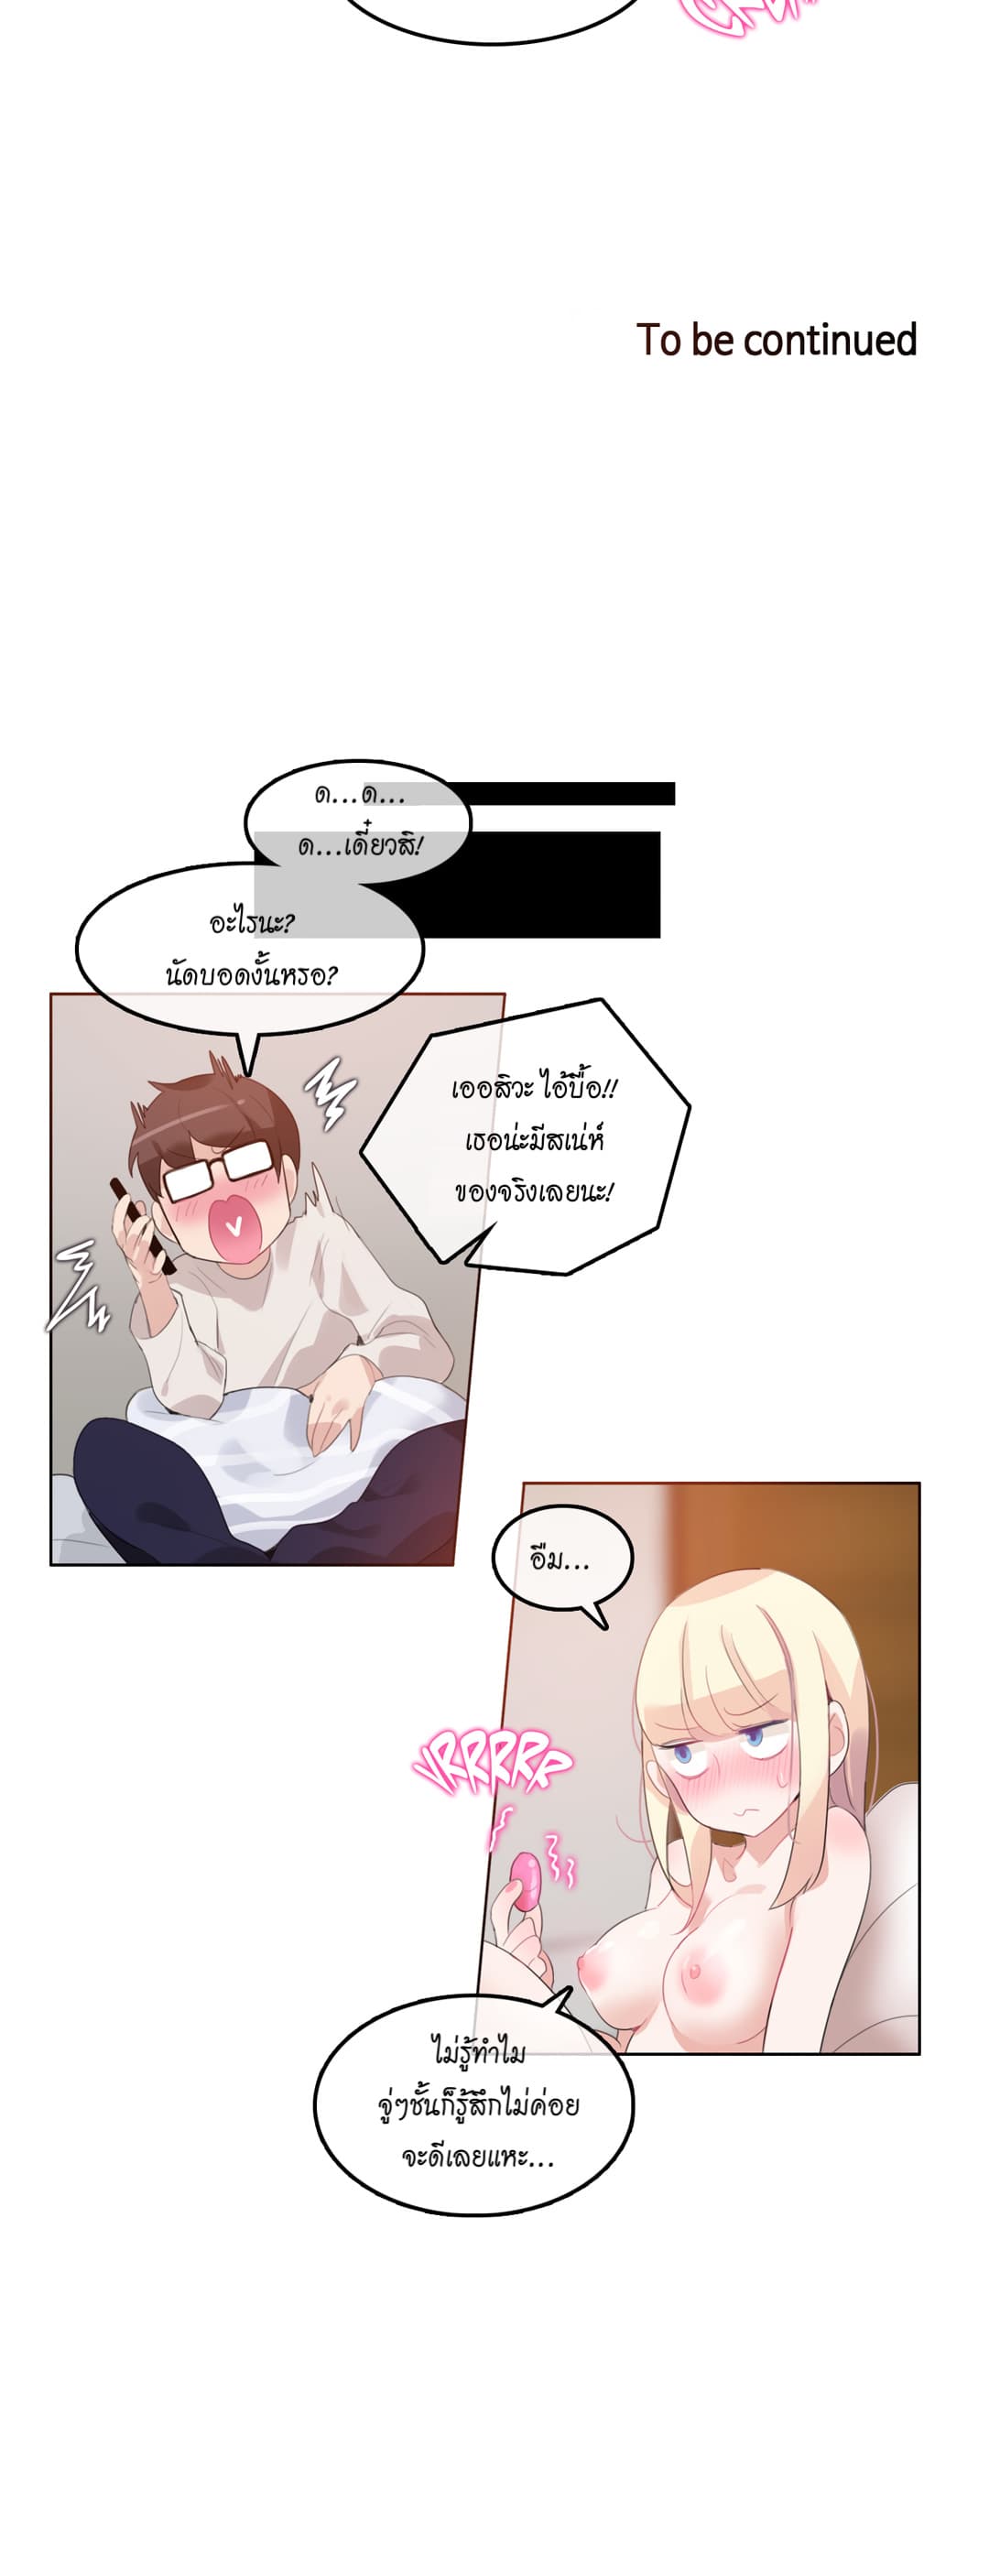 A Pervert’s Daily Life 26 (28)